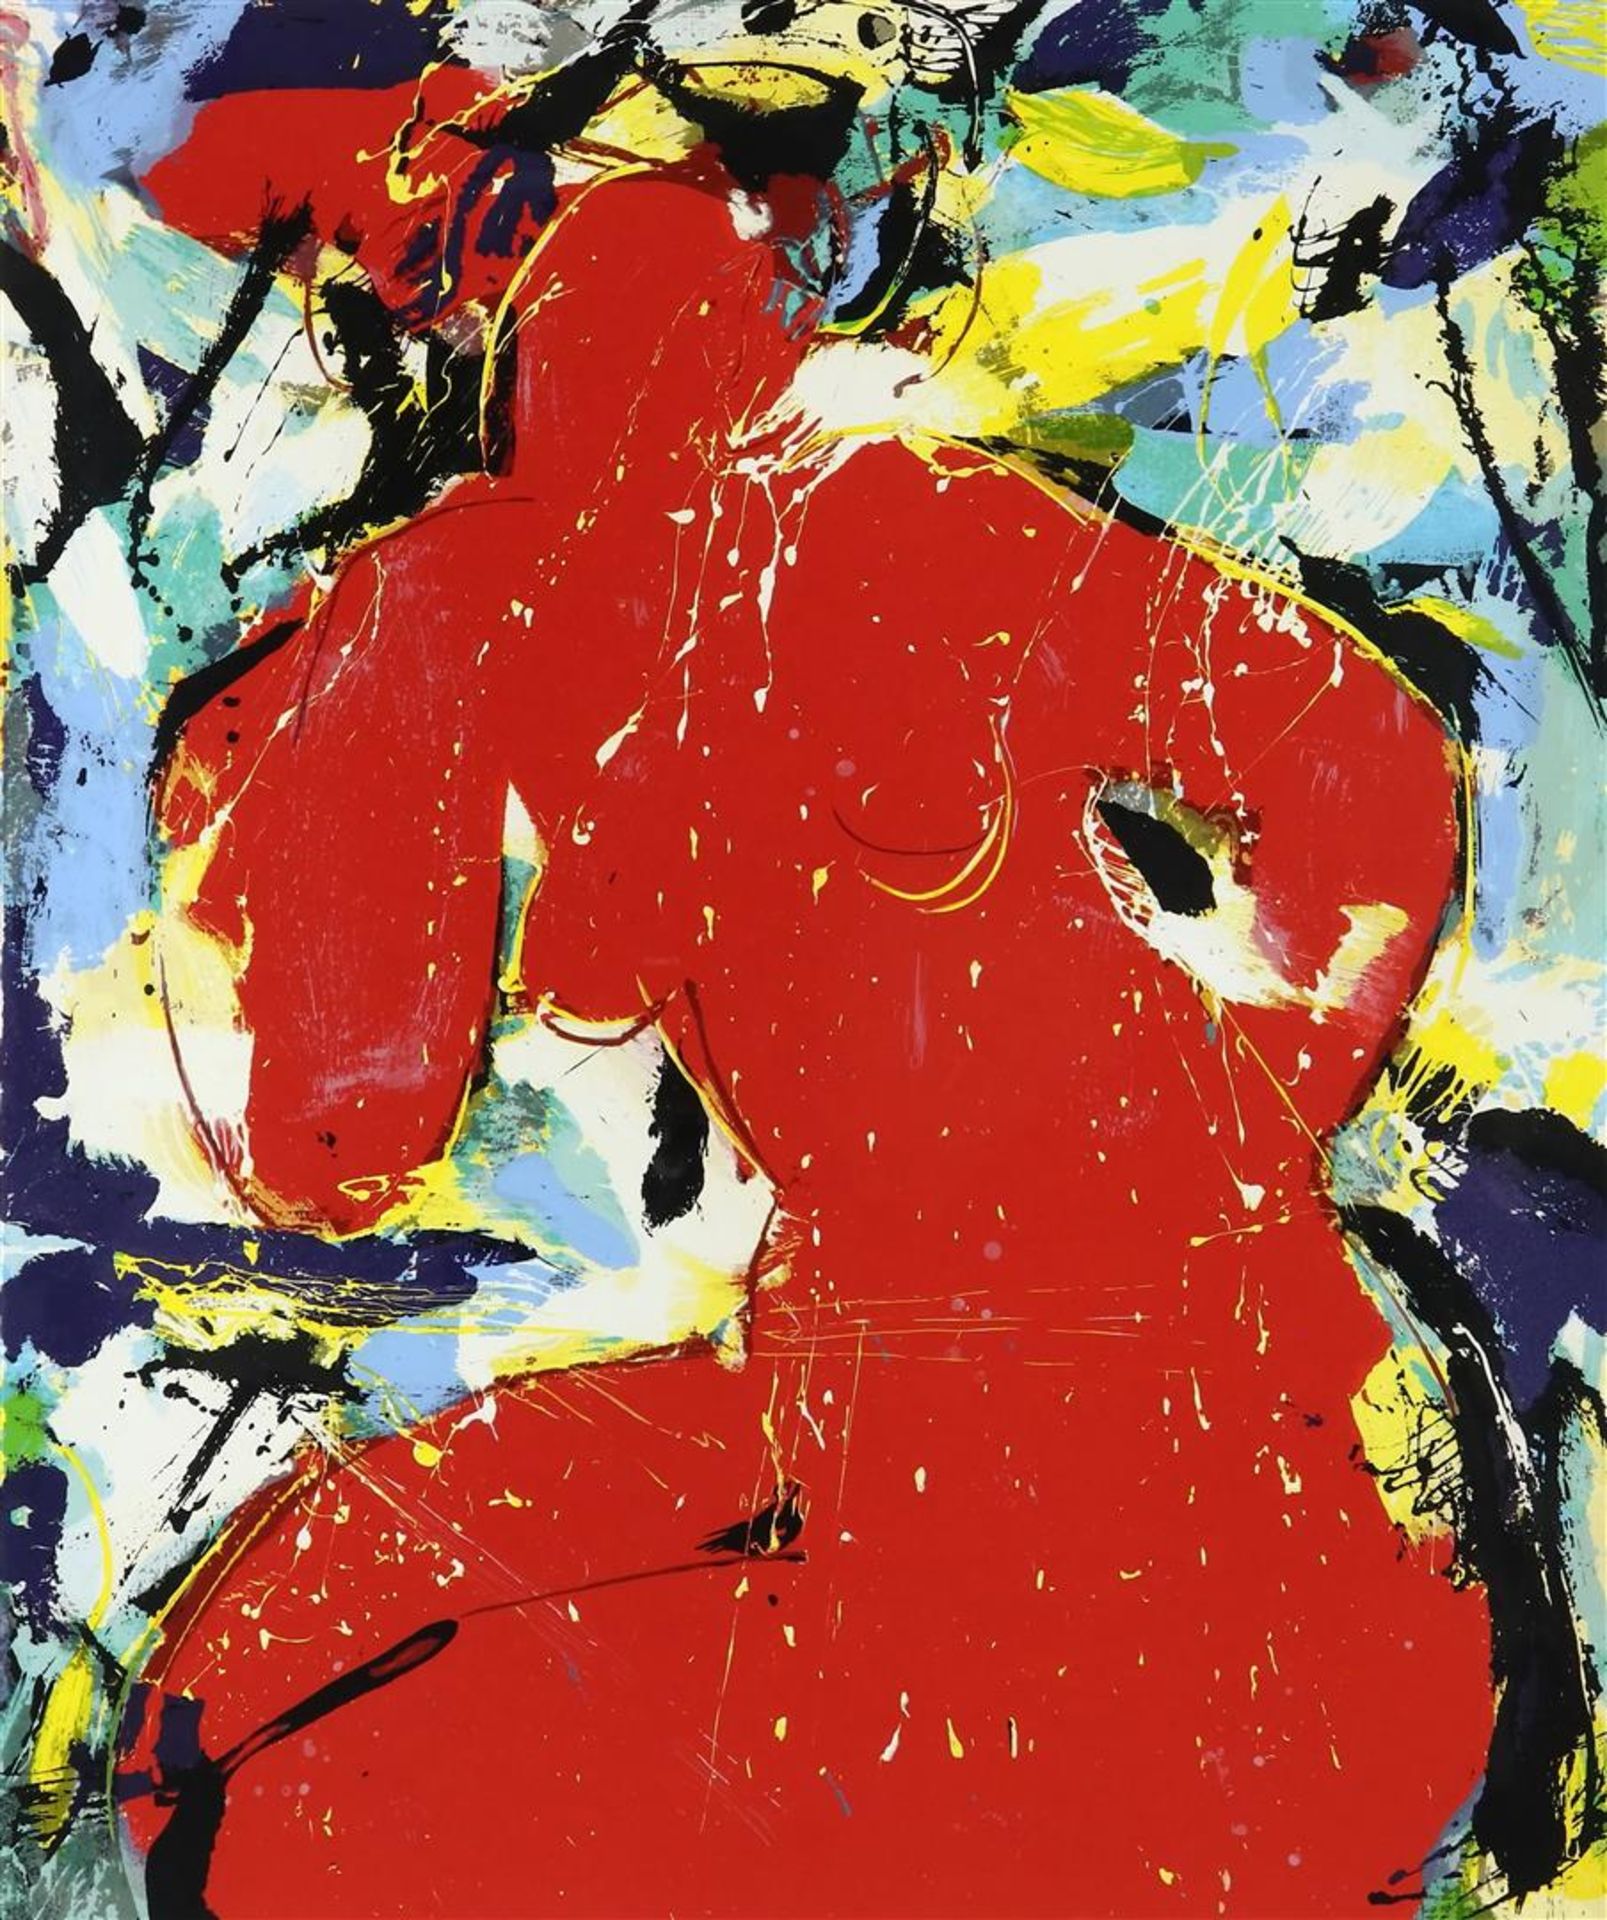 Nic Jonk (1928-1994) Amante, signed lower right and dated 1993, screen print 235/250 70 x 58 cm.